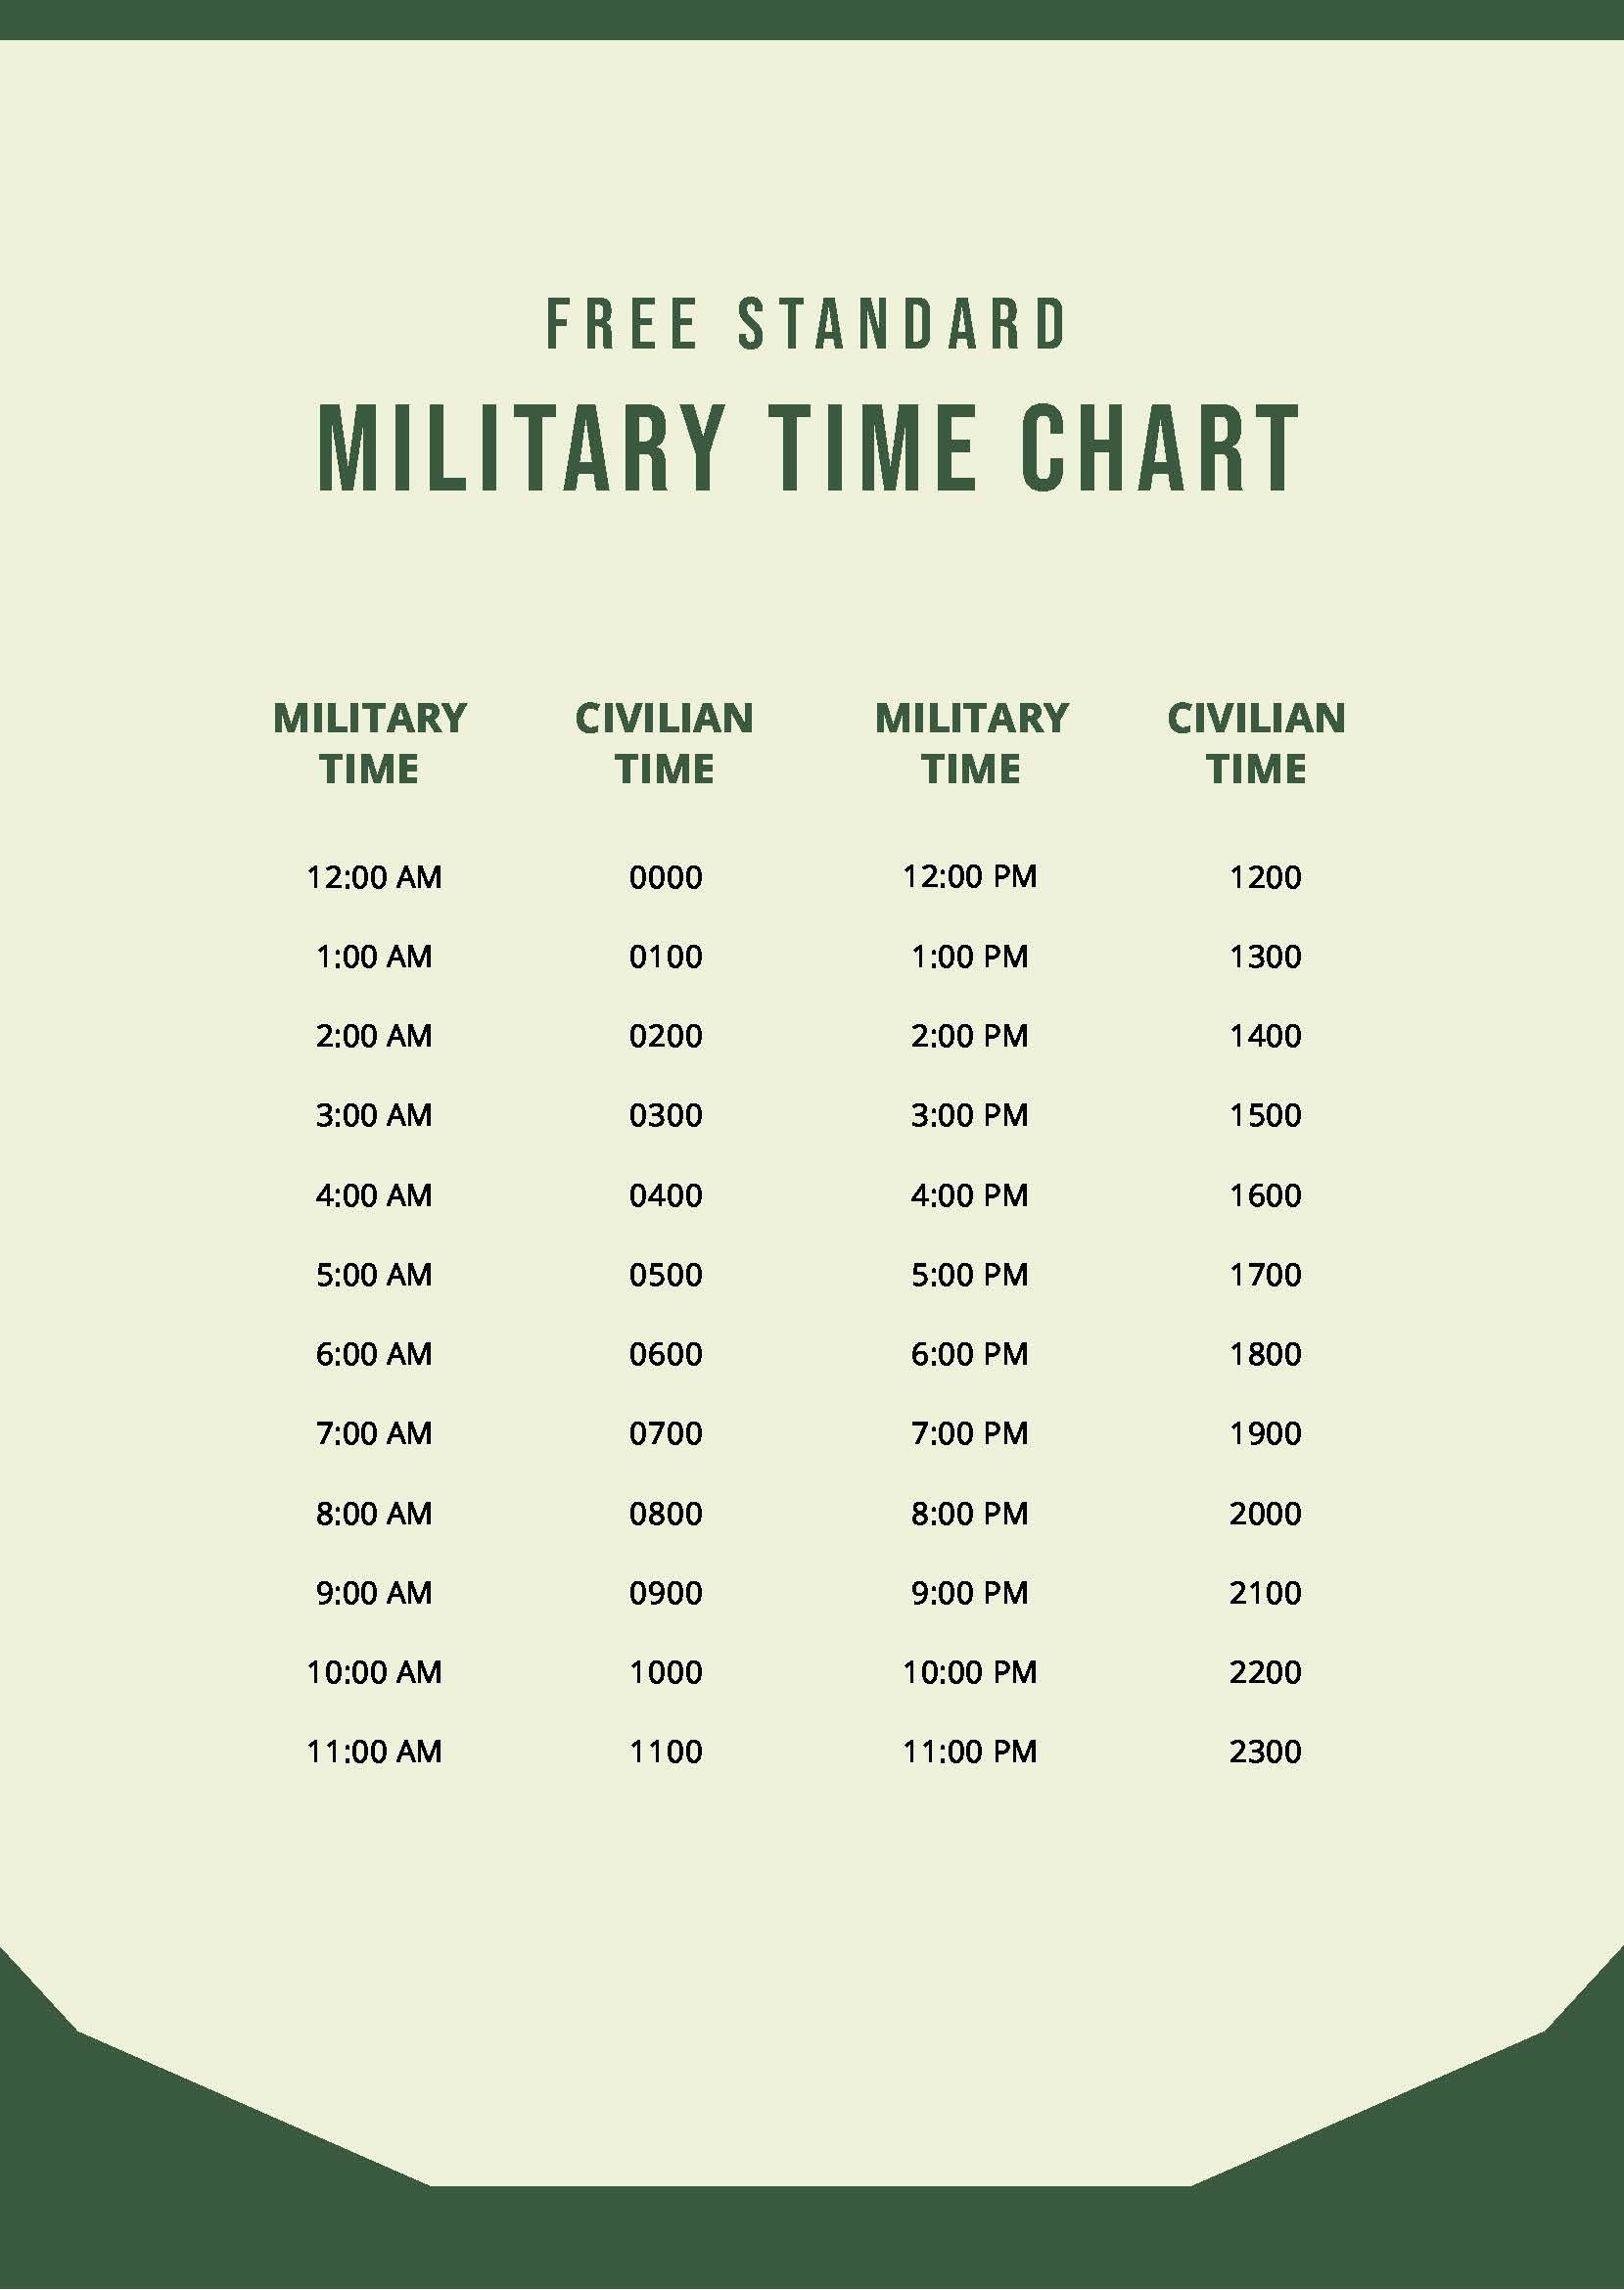 Free Standard Military Time Chart